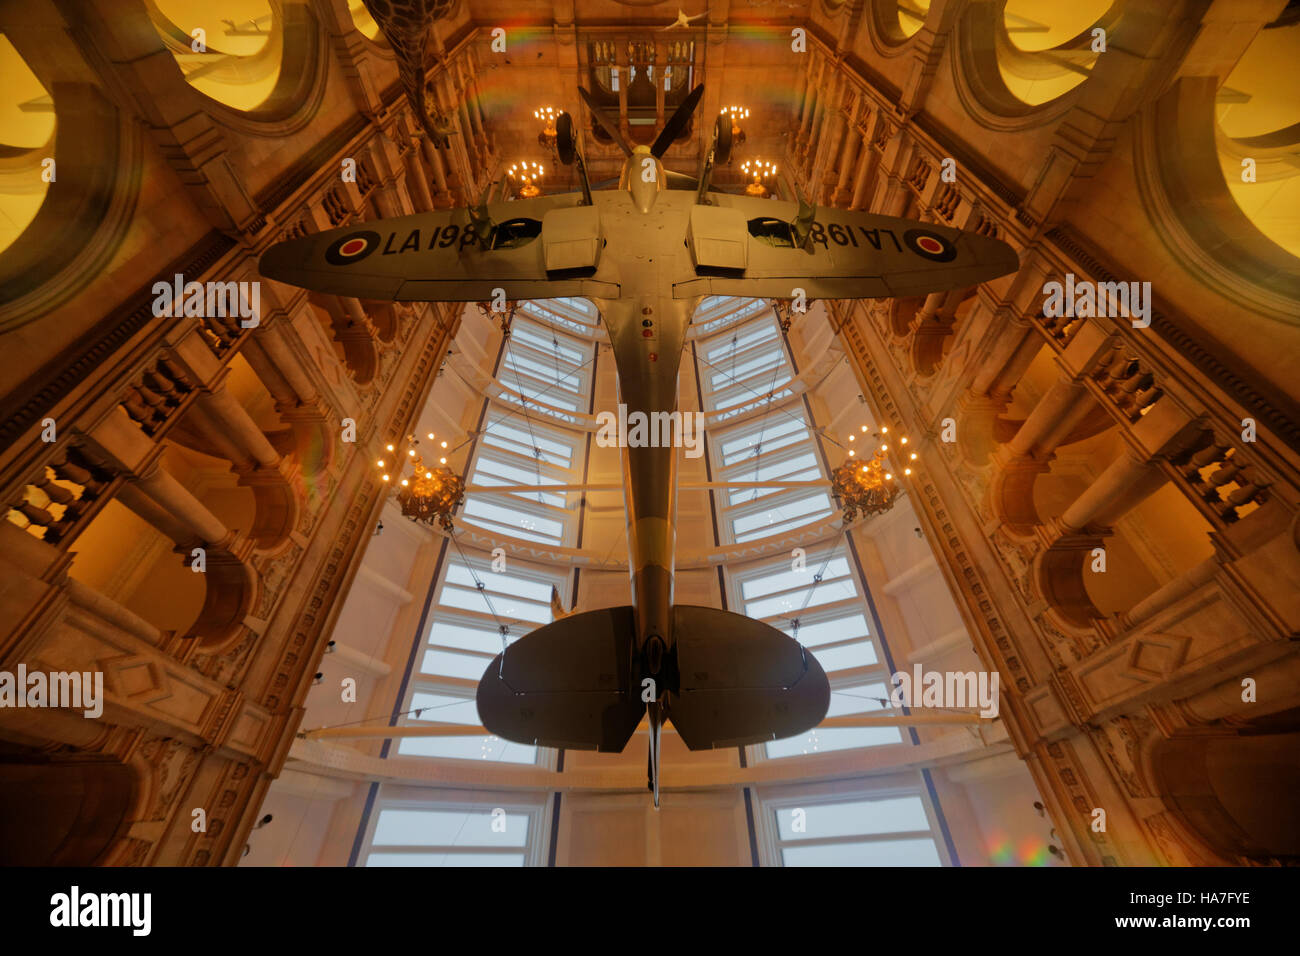 Glasgow Kelvingrove museum interior inside the galleries spitfire war plane hanging from ceiling viewed from below Stock Photo